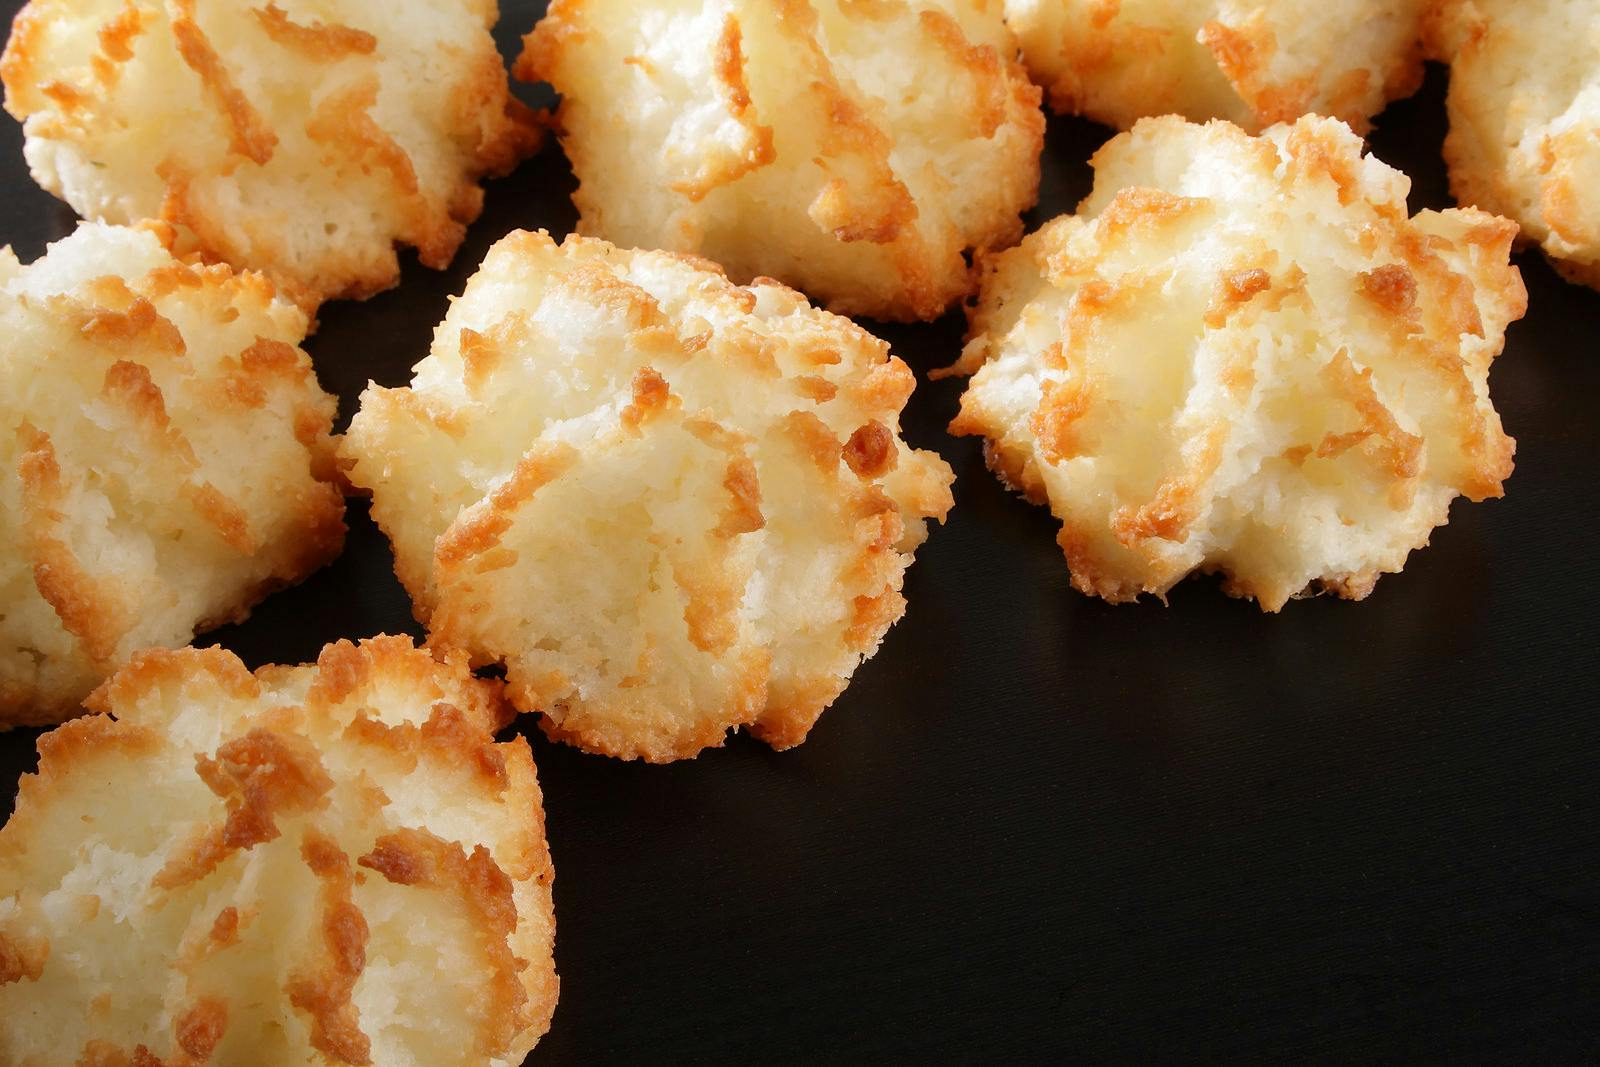 coconut macaroons are home remedy for irritable bowel, diarrhea